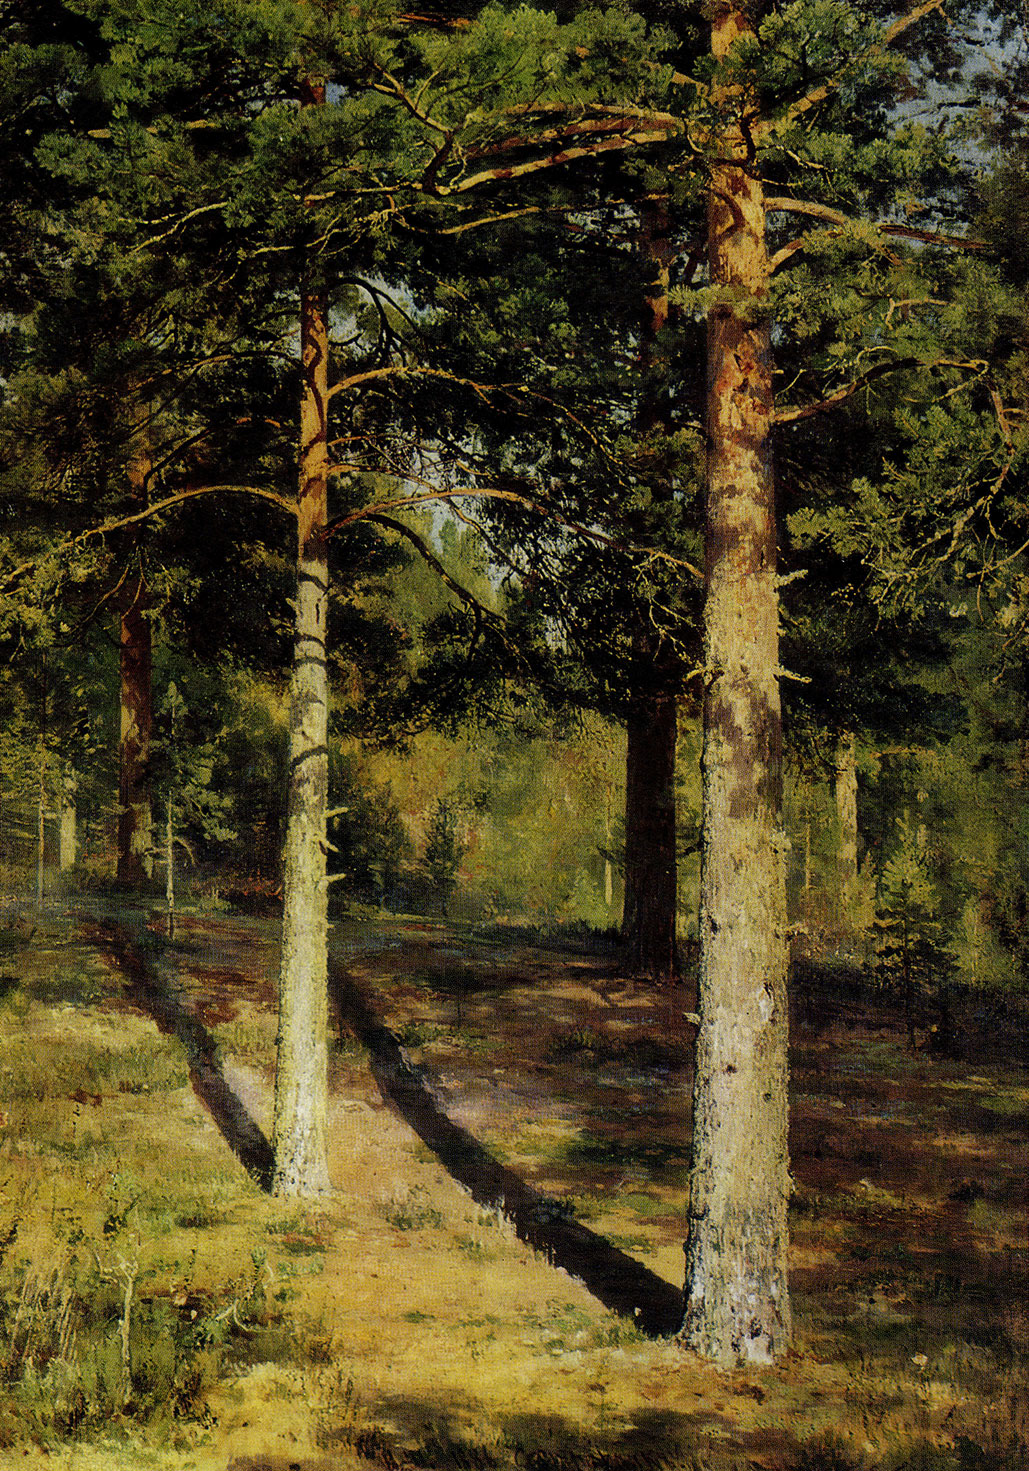 122. Pine-trees lit up by the sun. Study. 1886. Oil on canvas. 102X70.2 cm. The Tretyakov Gallery, Moscow